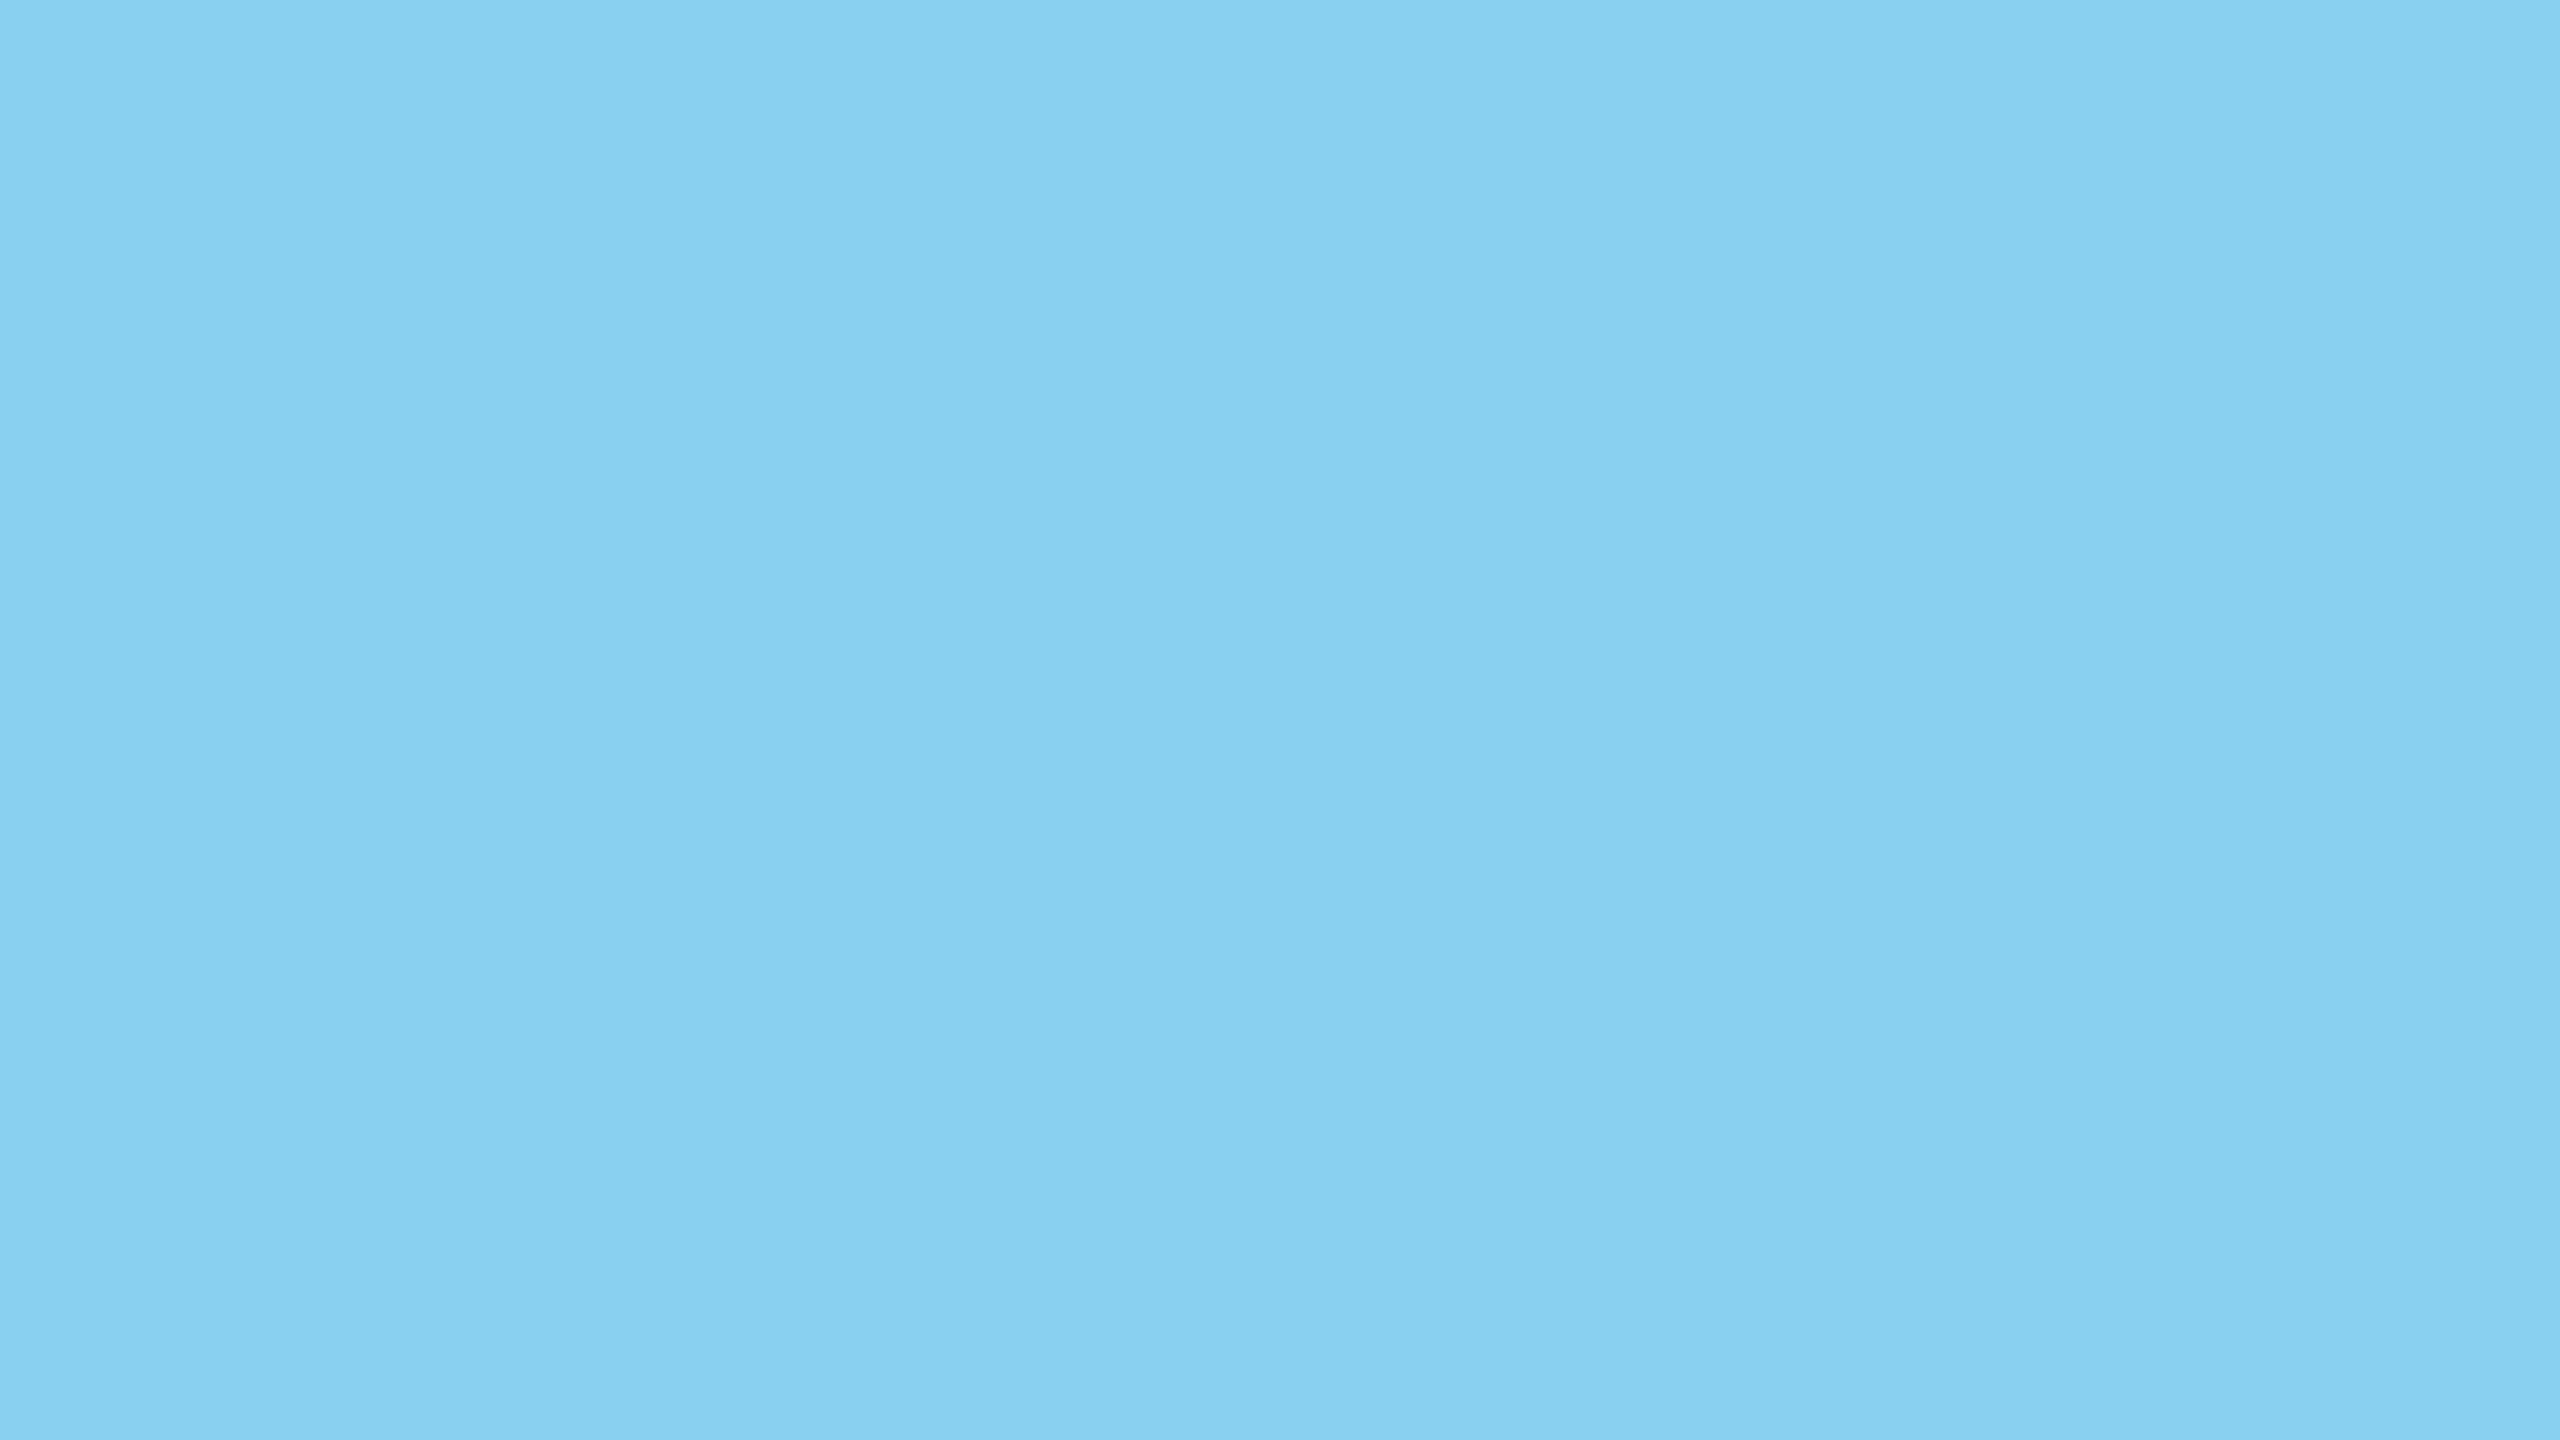 2560x1440-baby-blue-solid-color-background.jpg